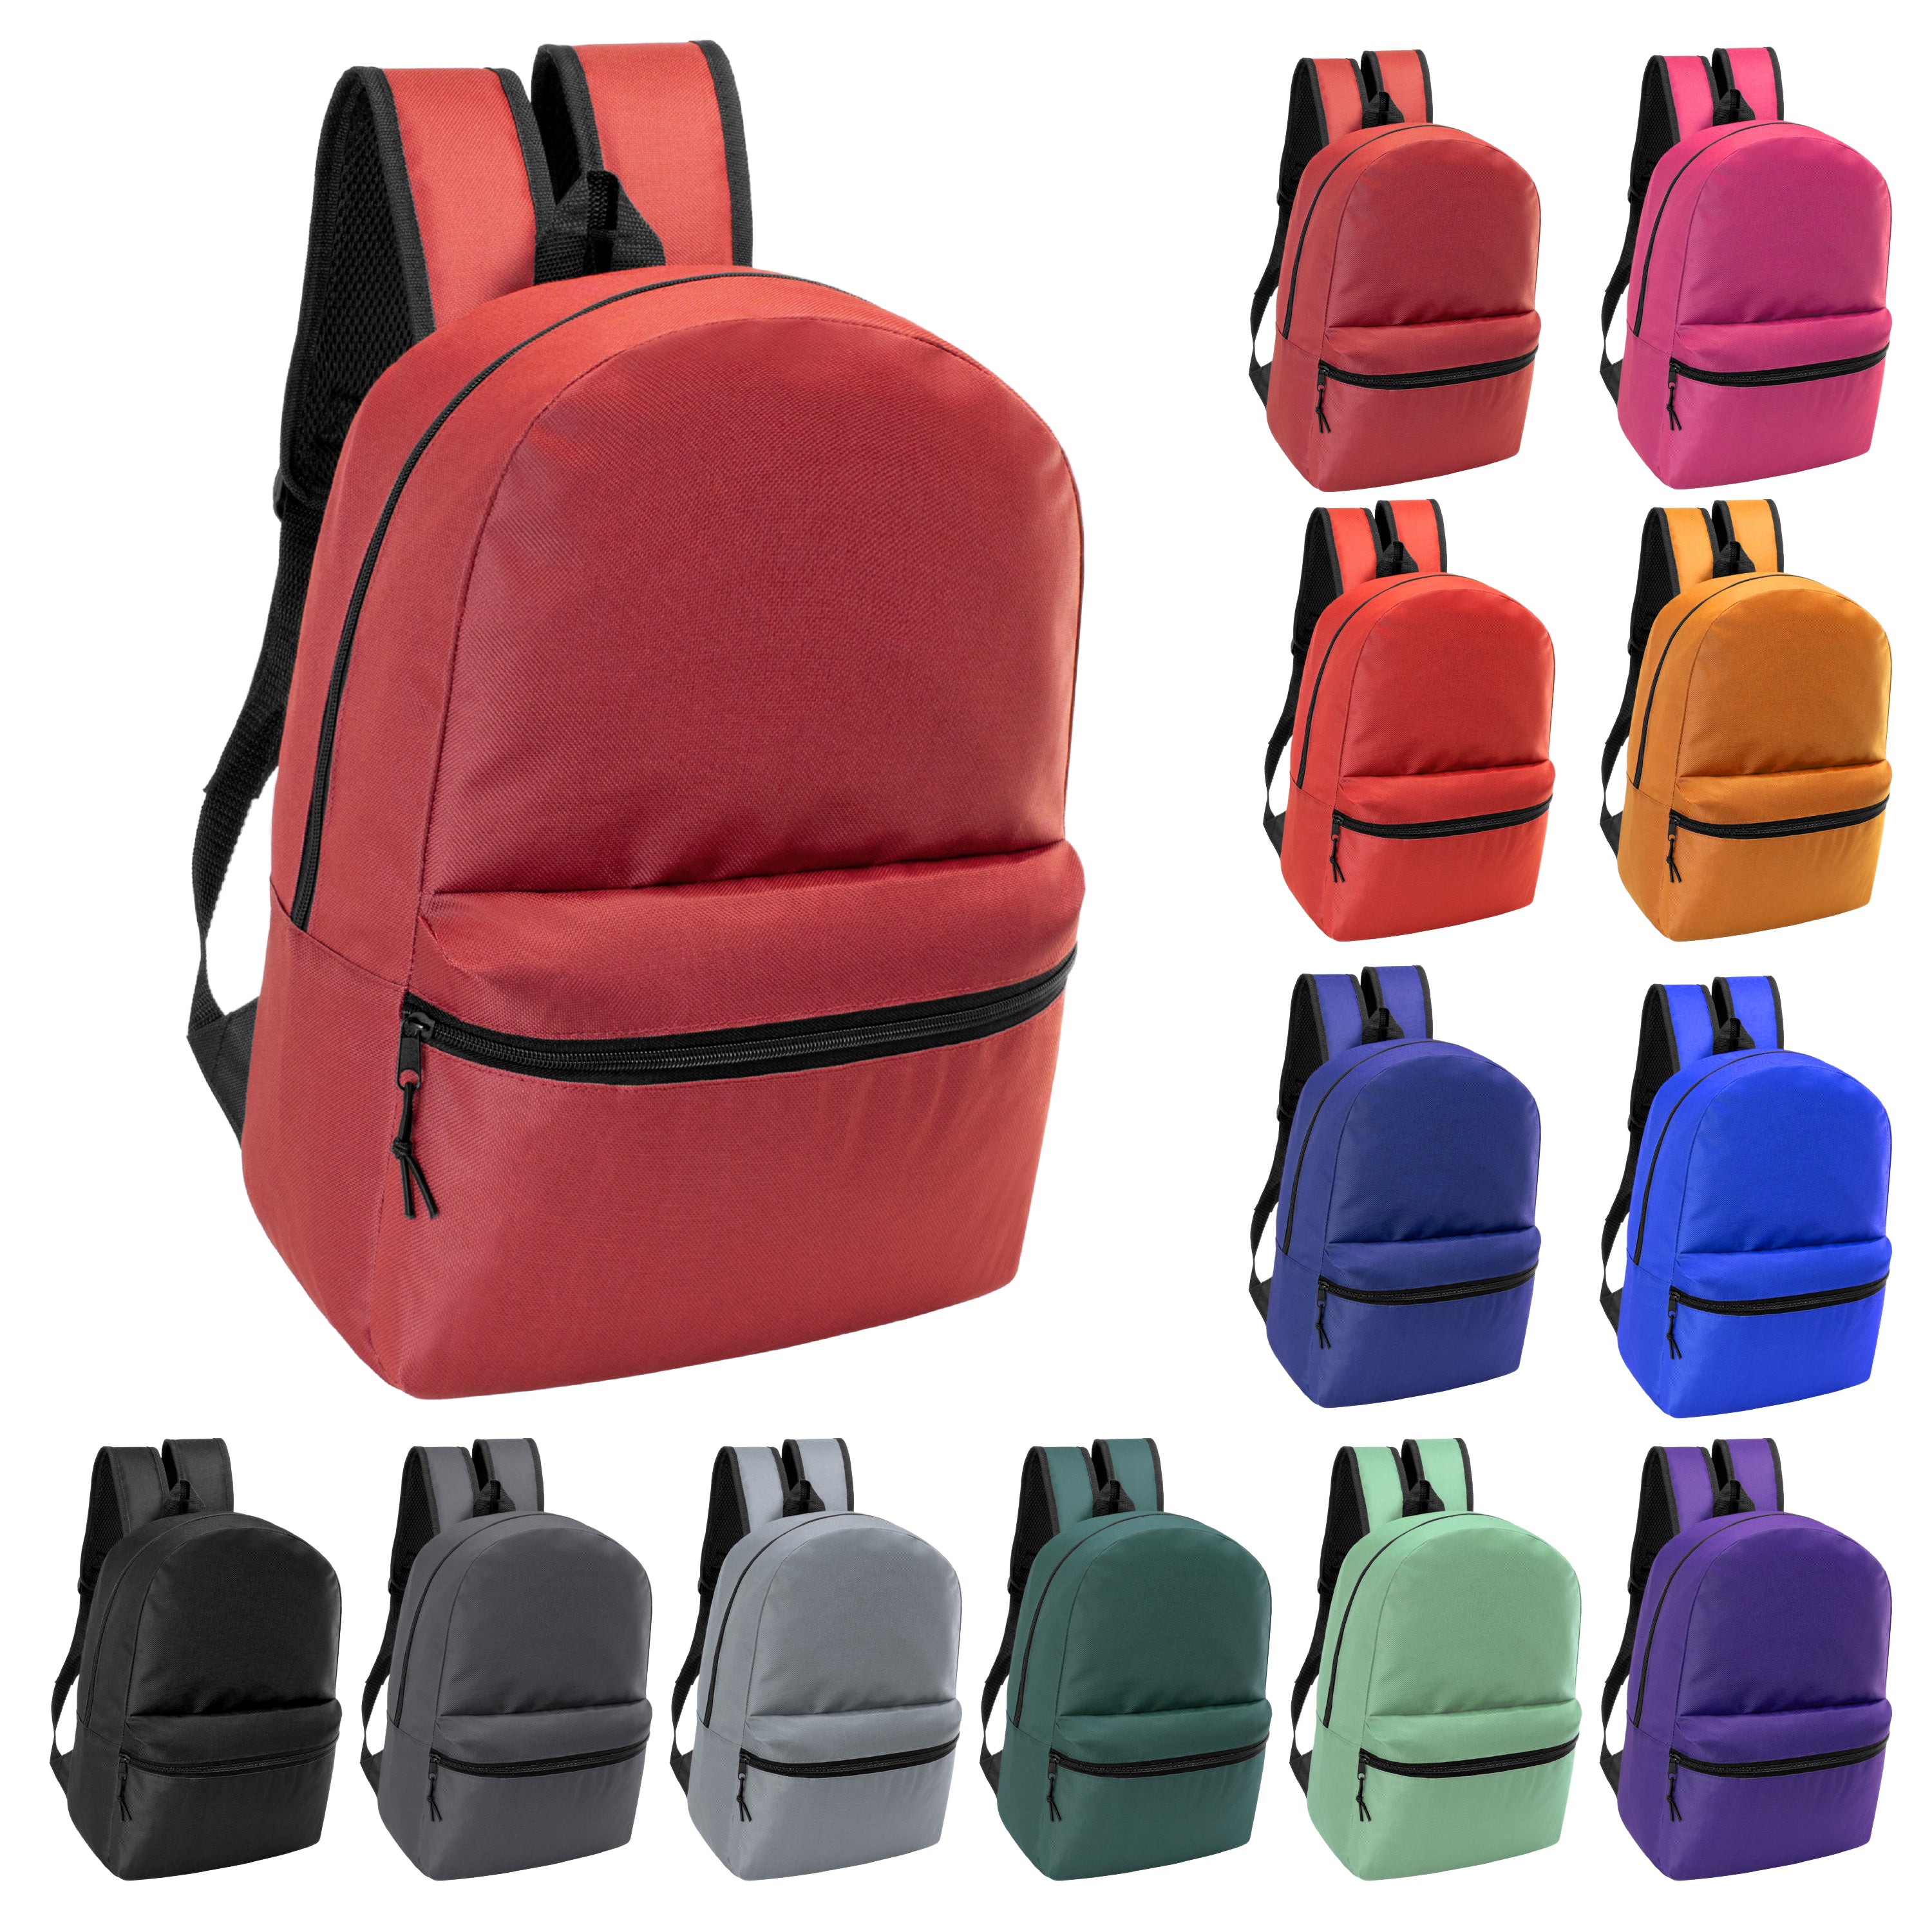 12 Wholesale 17" Basic Backpacks in 12 Assorted Colors & 12 Bulk School Supply Kits of Your Choice